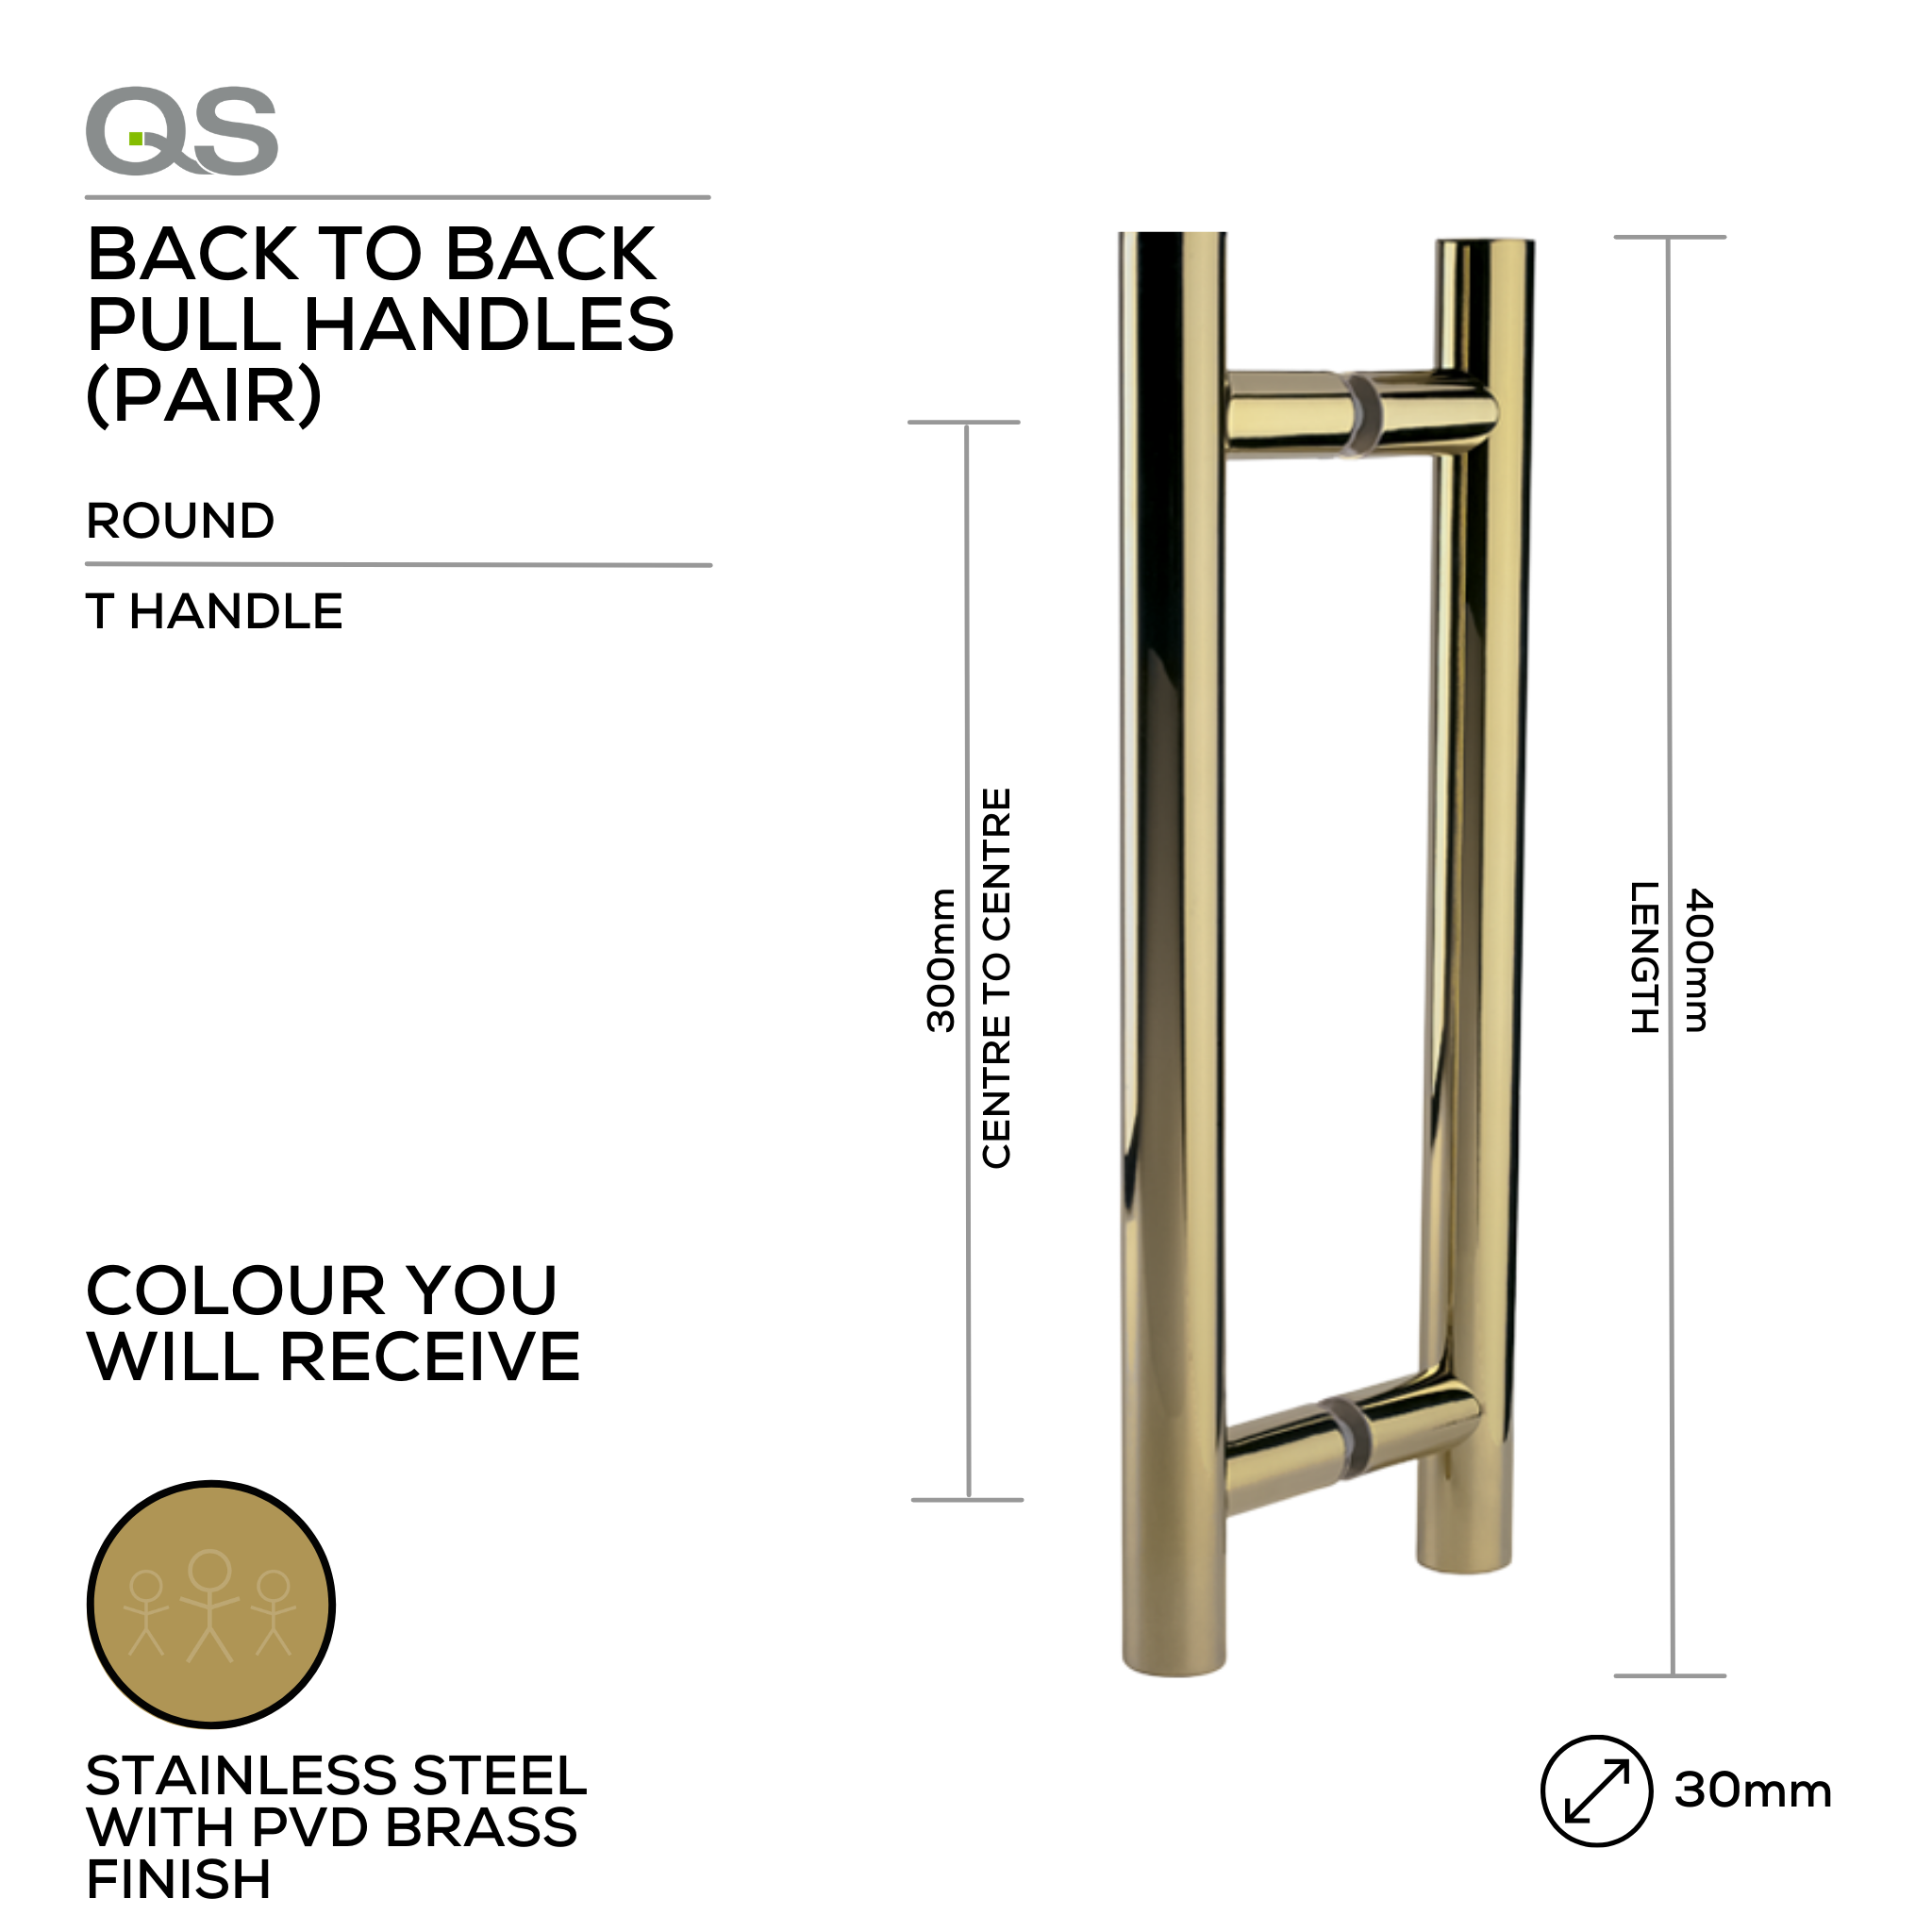 QS2507 PVD T Handle, Pull Handle, Round, T Handle, BTB, 30mm (Ø) x 400mm (l) x 300mm (ctc), Stainless Steel with PVD Brass Finish, QS